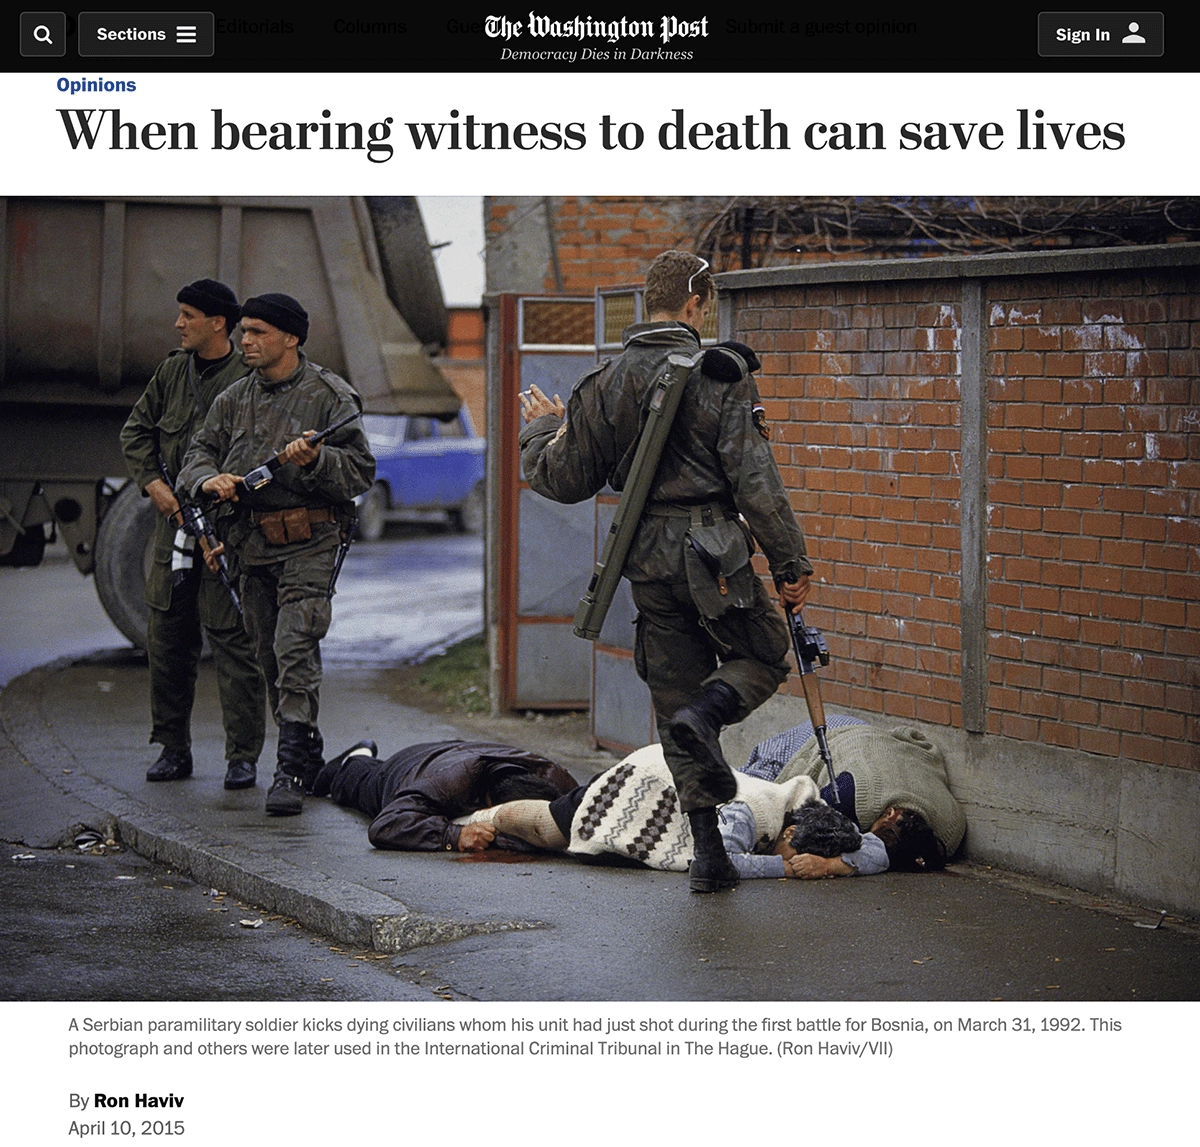 Haviv's photo atop his 2015 opinion piece in <em><a href='https://www.washingtonpost.com/opinions/the-photographers-choice-bystander-or-upstander/2015/04/10/4a582e8a-dfa7-11e4-a500-1c5bb1d8ff6a_story.html' target='_blank'>The Washington Post</a></em>.